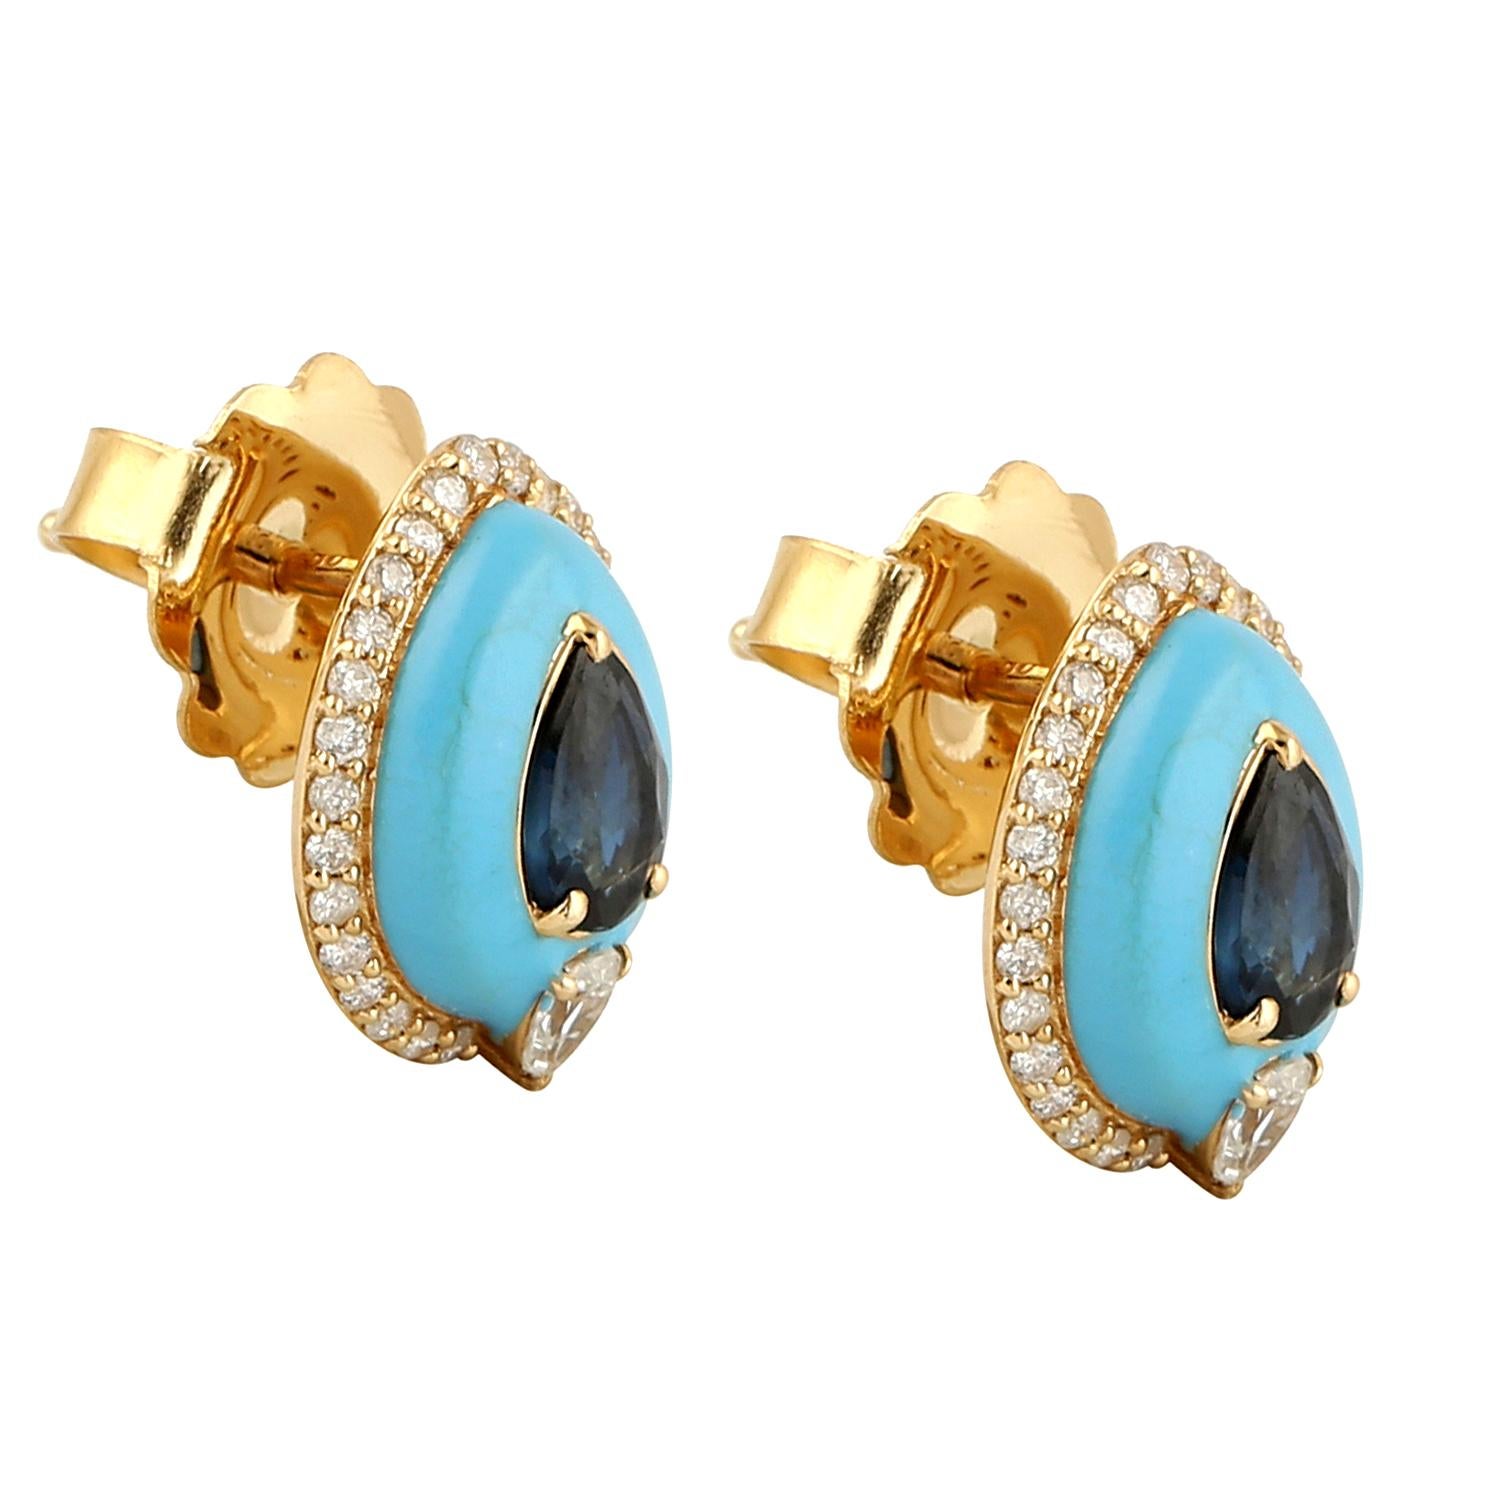 Contemporary Pear Shaped Blue Sapphire & Enamel Studs With Diamonds Made In 18K Yellow Gold For Sale